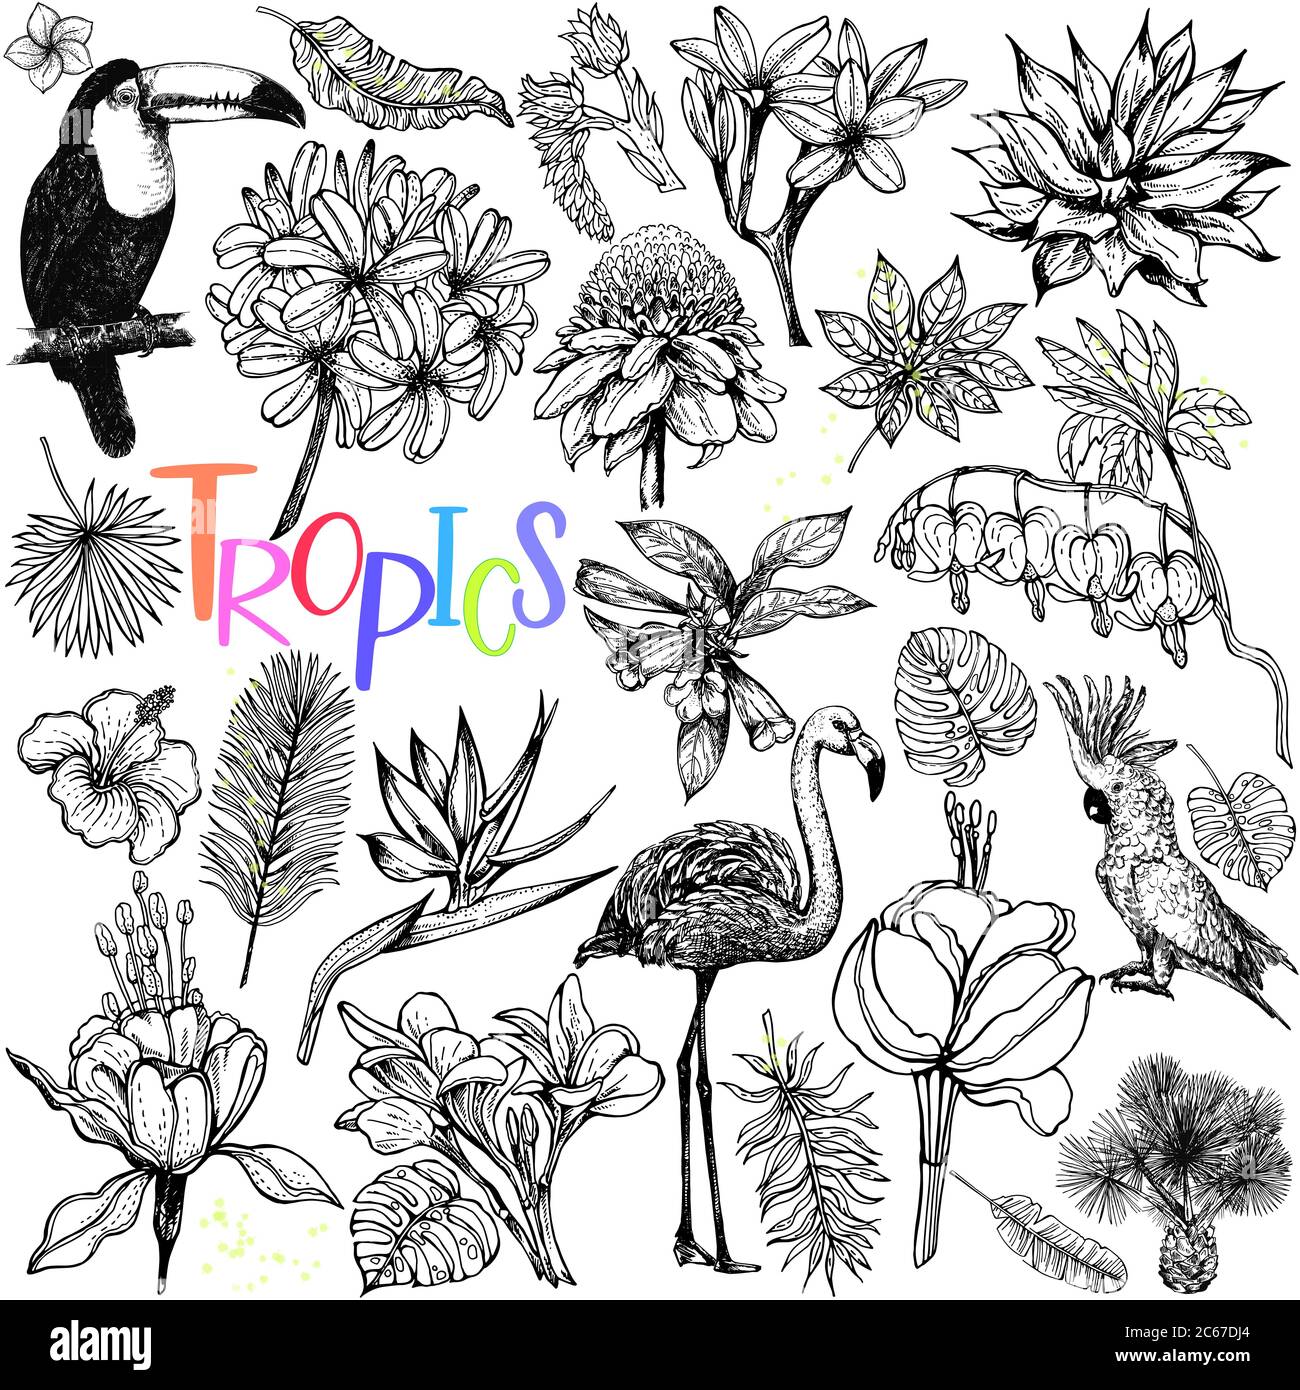 Big set of hand drawn sketch style tropical flowers, plants, cockatoo, flamingo and toucan isolated on white background. Vector illustration. Stock Vector